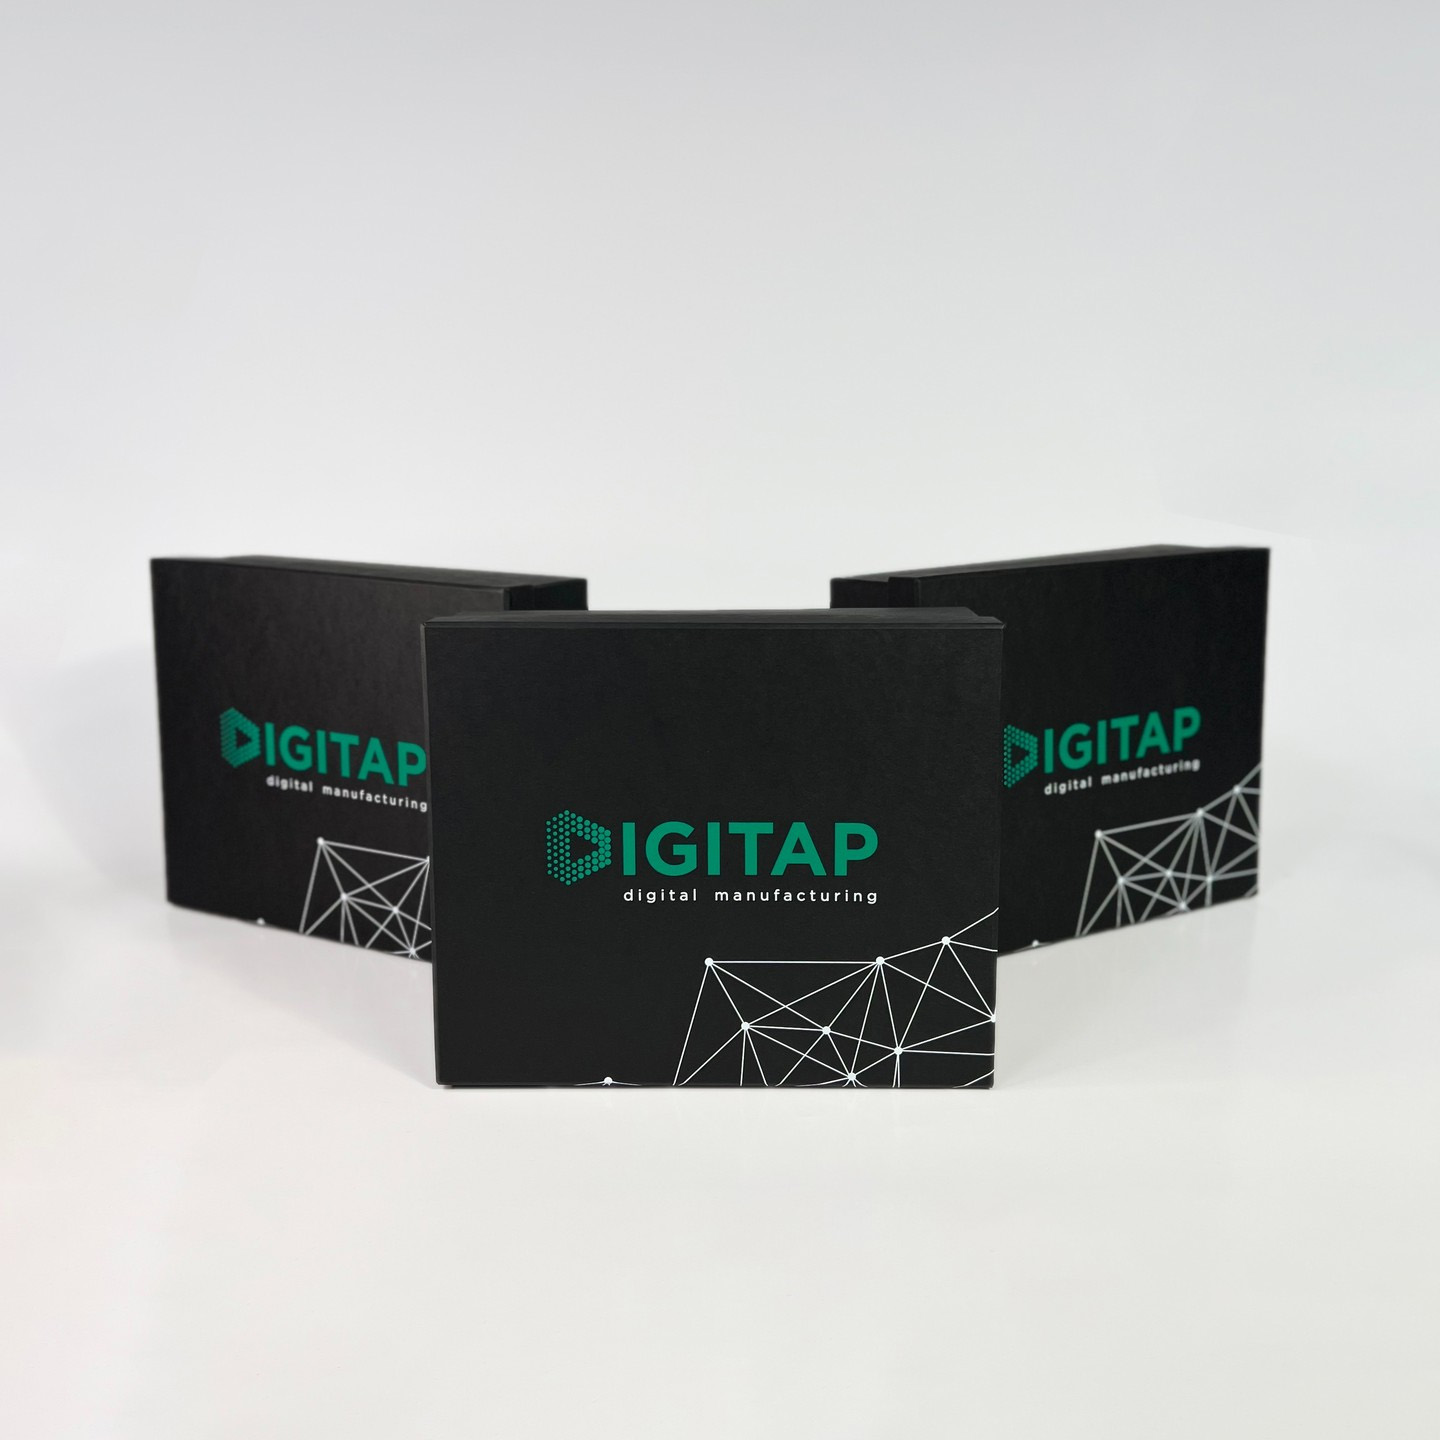 Boxes for the Digitap company 4